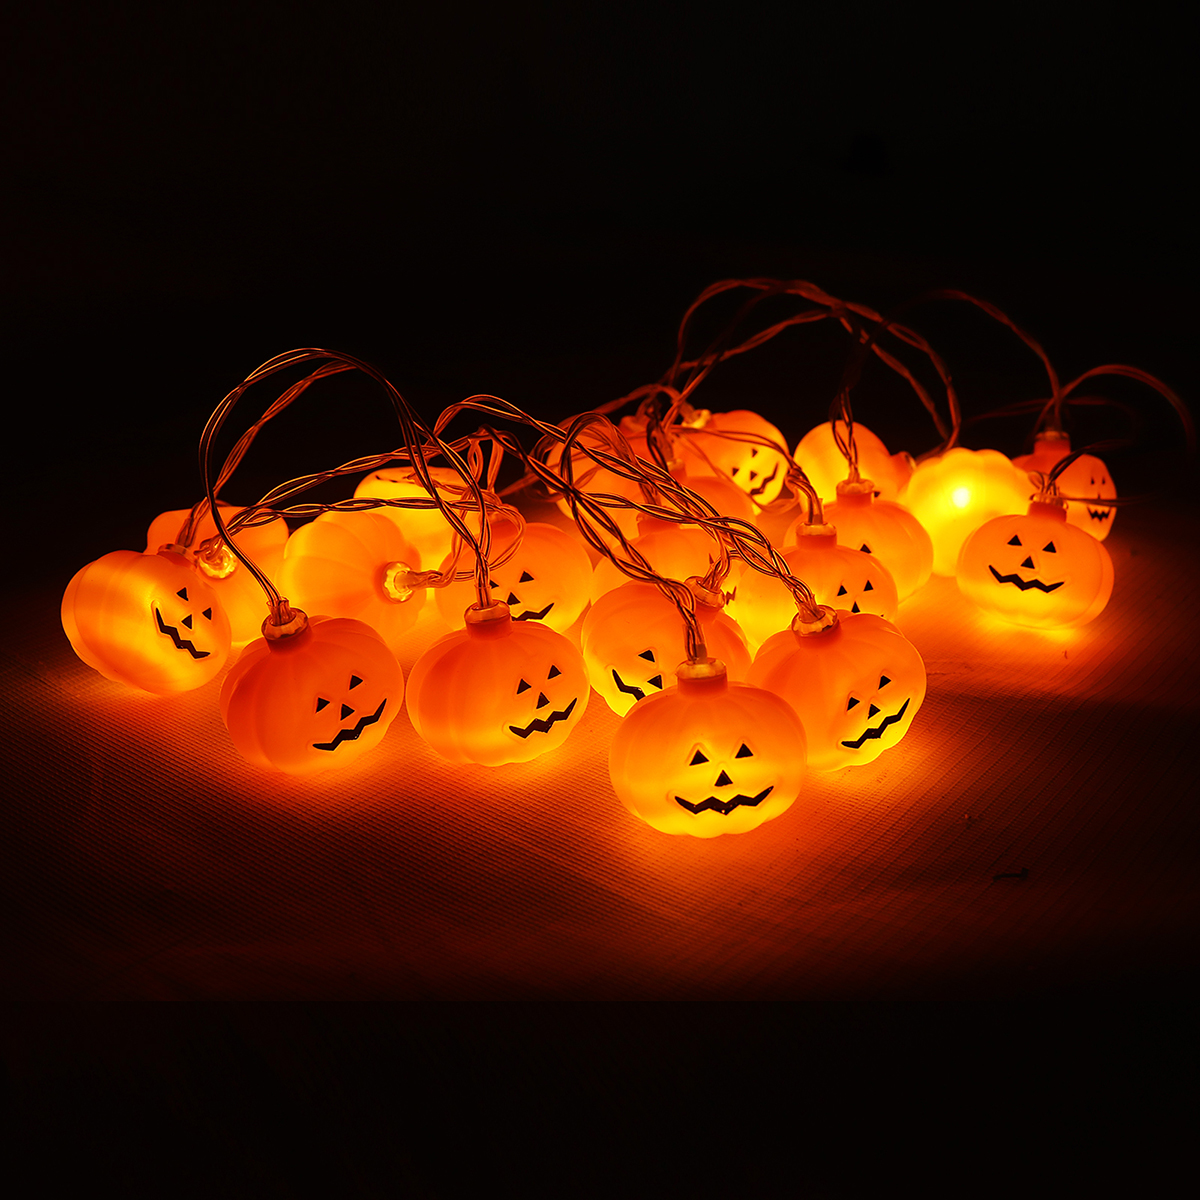 Find 9 8ft Halloween Decorations 20 LED Pumpkin String Lights Home Garden Decor Warm White for Sale on Gipsybee.com with cryptocurrencies